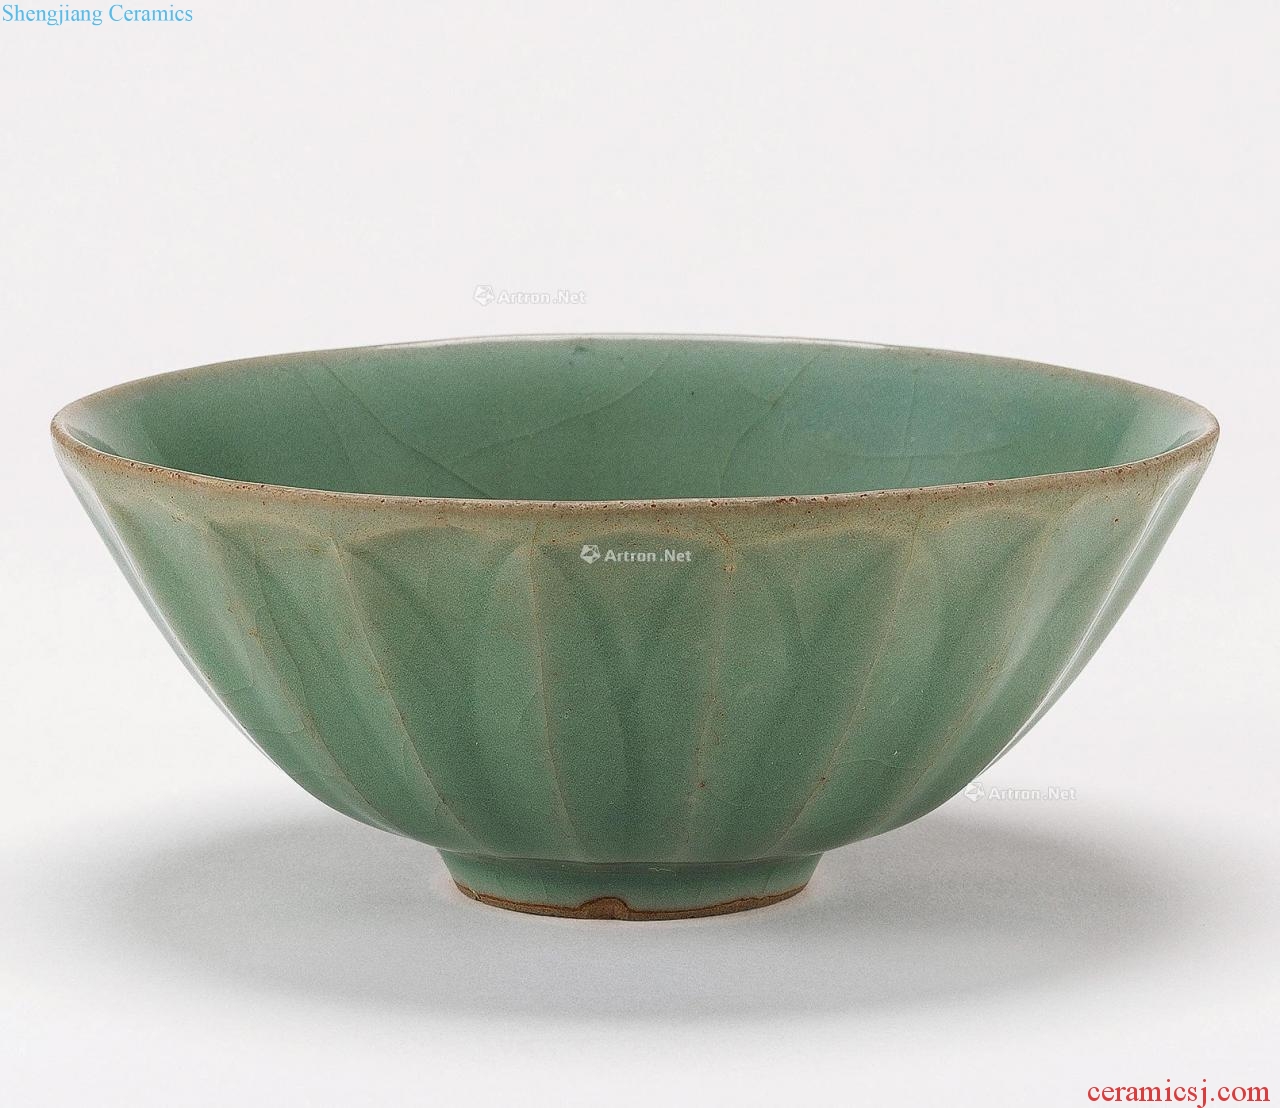 The southern song dynasty Longquan celadon lotus-shaped bowl